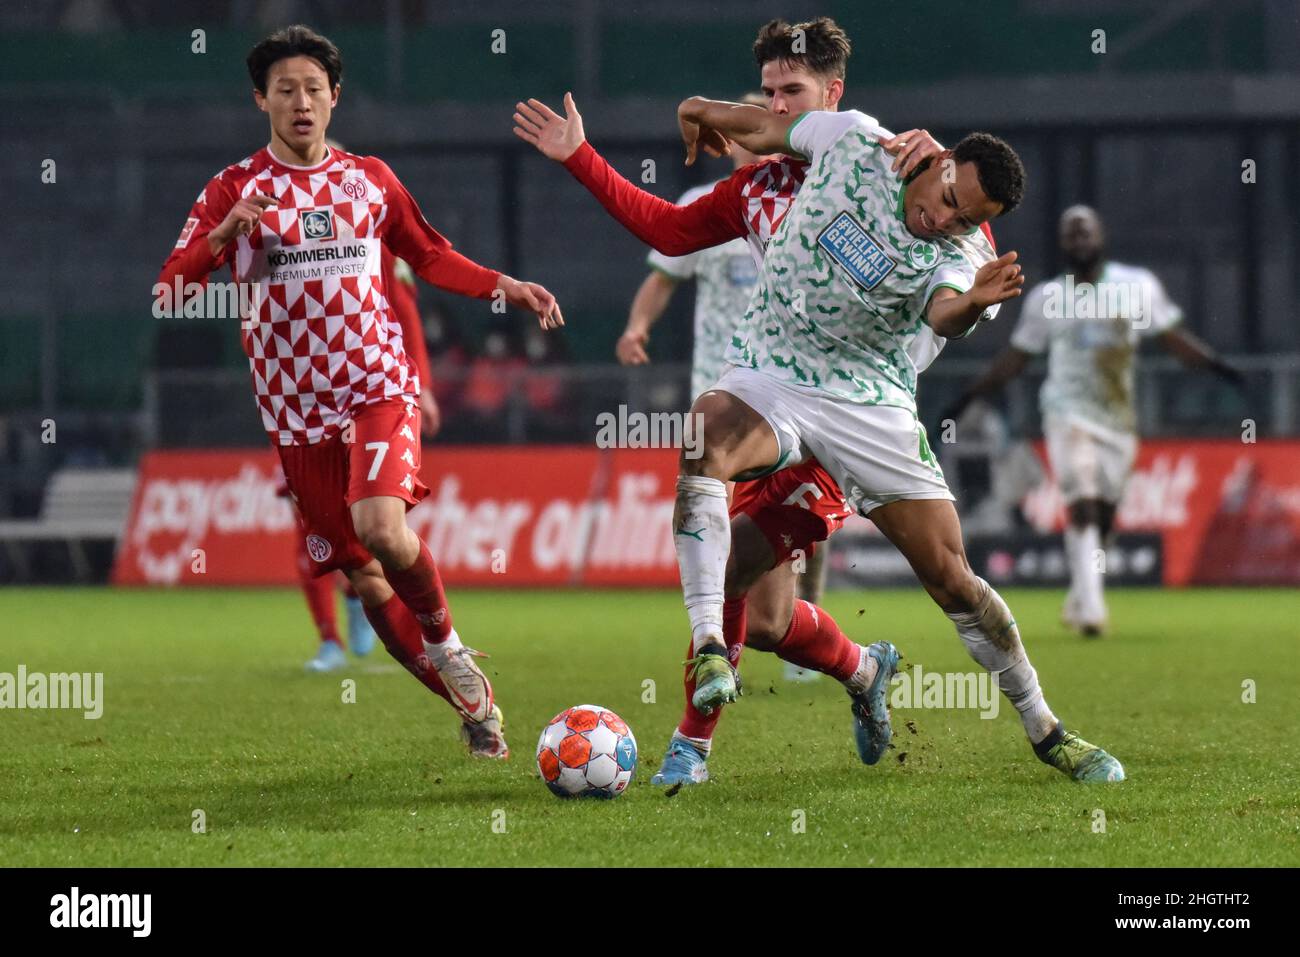 Germany ,Fuerth, Sportpark Ronhof Thomas Sommer - 22 Jan 2022 - Fussball, 1.Bundesliga - SpVgg Greuther Fuerth vs. FSV Mainz 05  Image: (fLTR) Anton Stach (Mainz, 6), Jamie Leweling (SpVgg Greuther Fürth,40)  DFL regulations prohibit any use of photographs as image sequences and or quasi-video Stock Photo